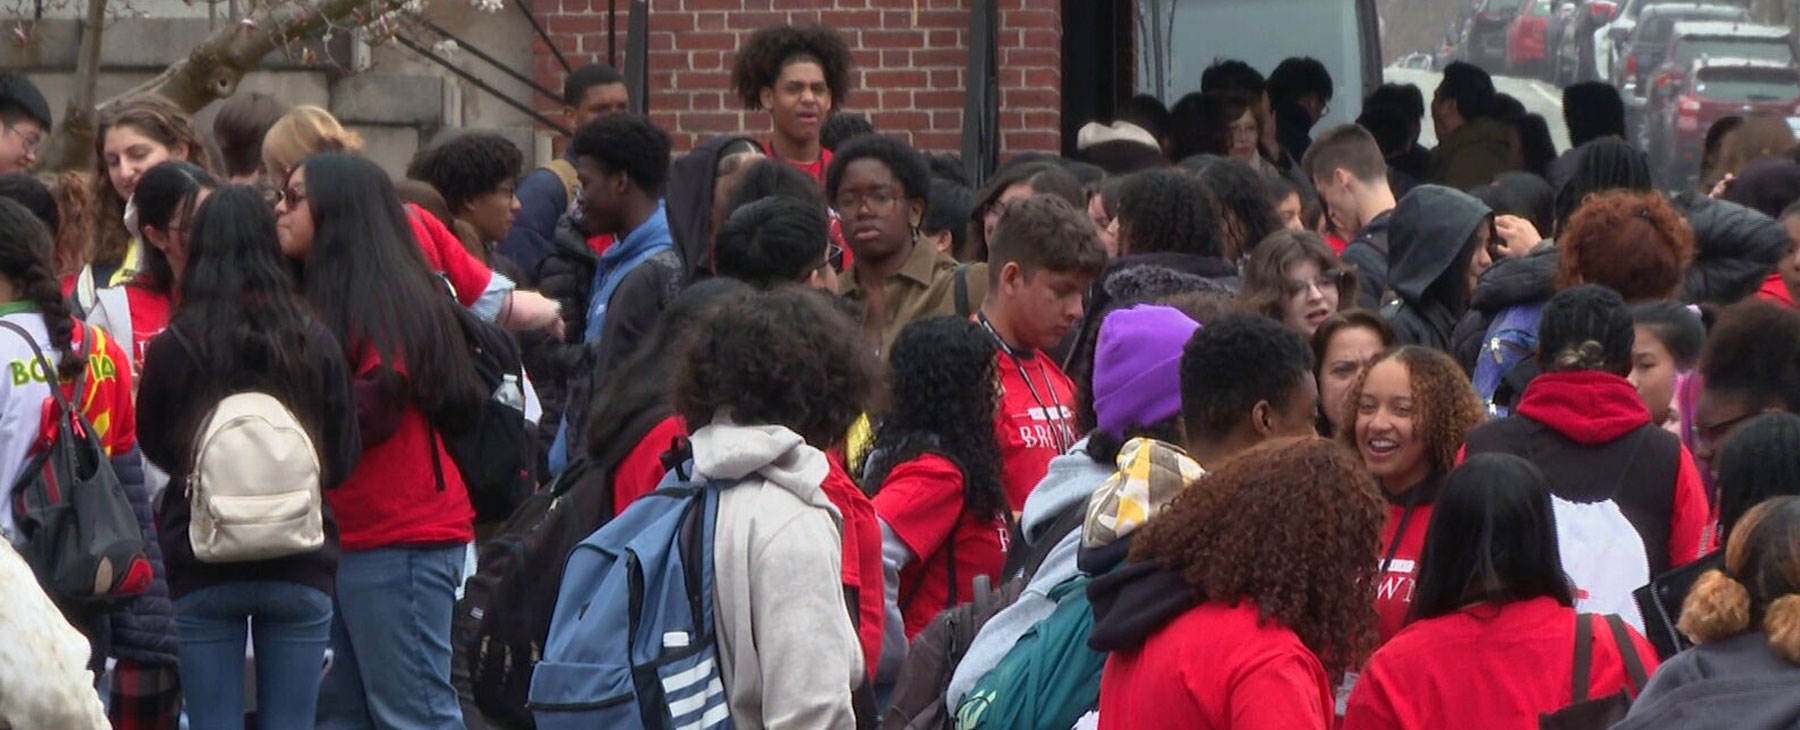 Hundreds of high school students visit Brown University for College Day